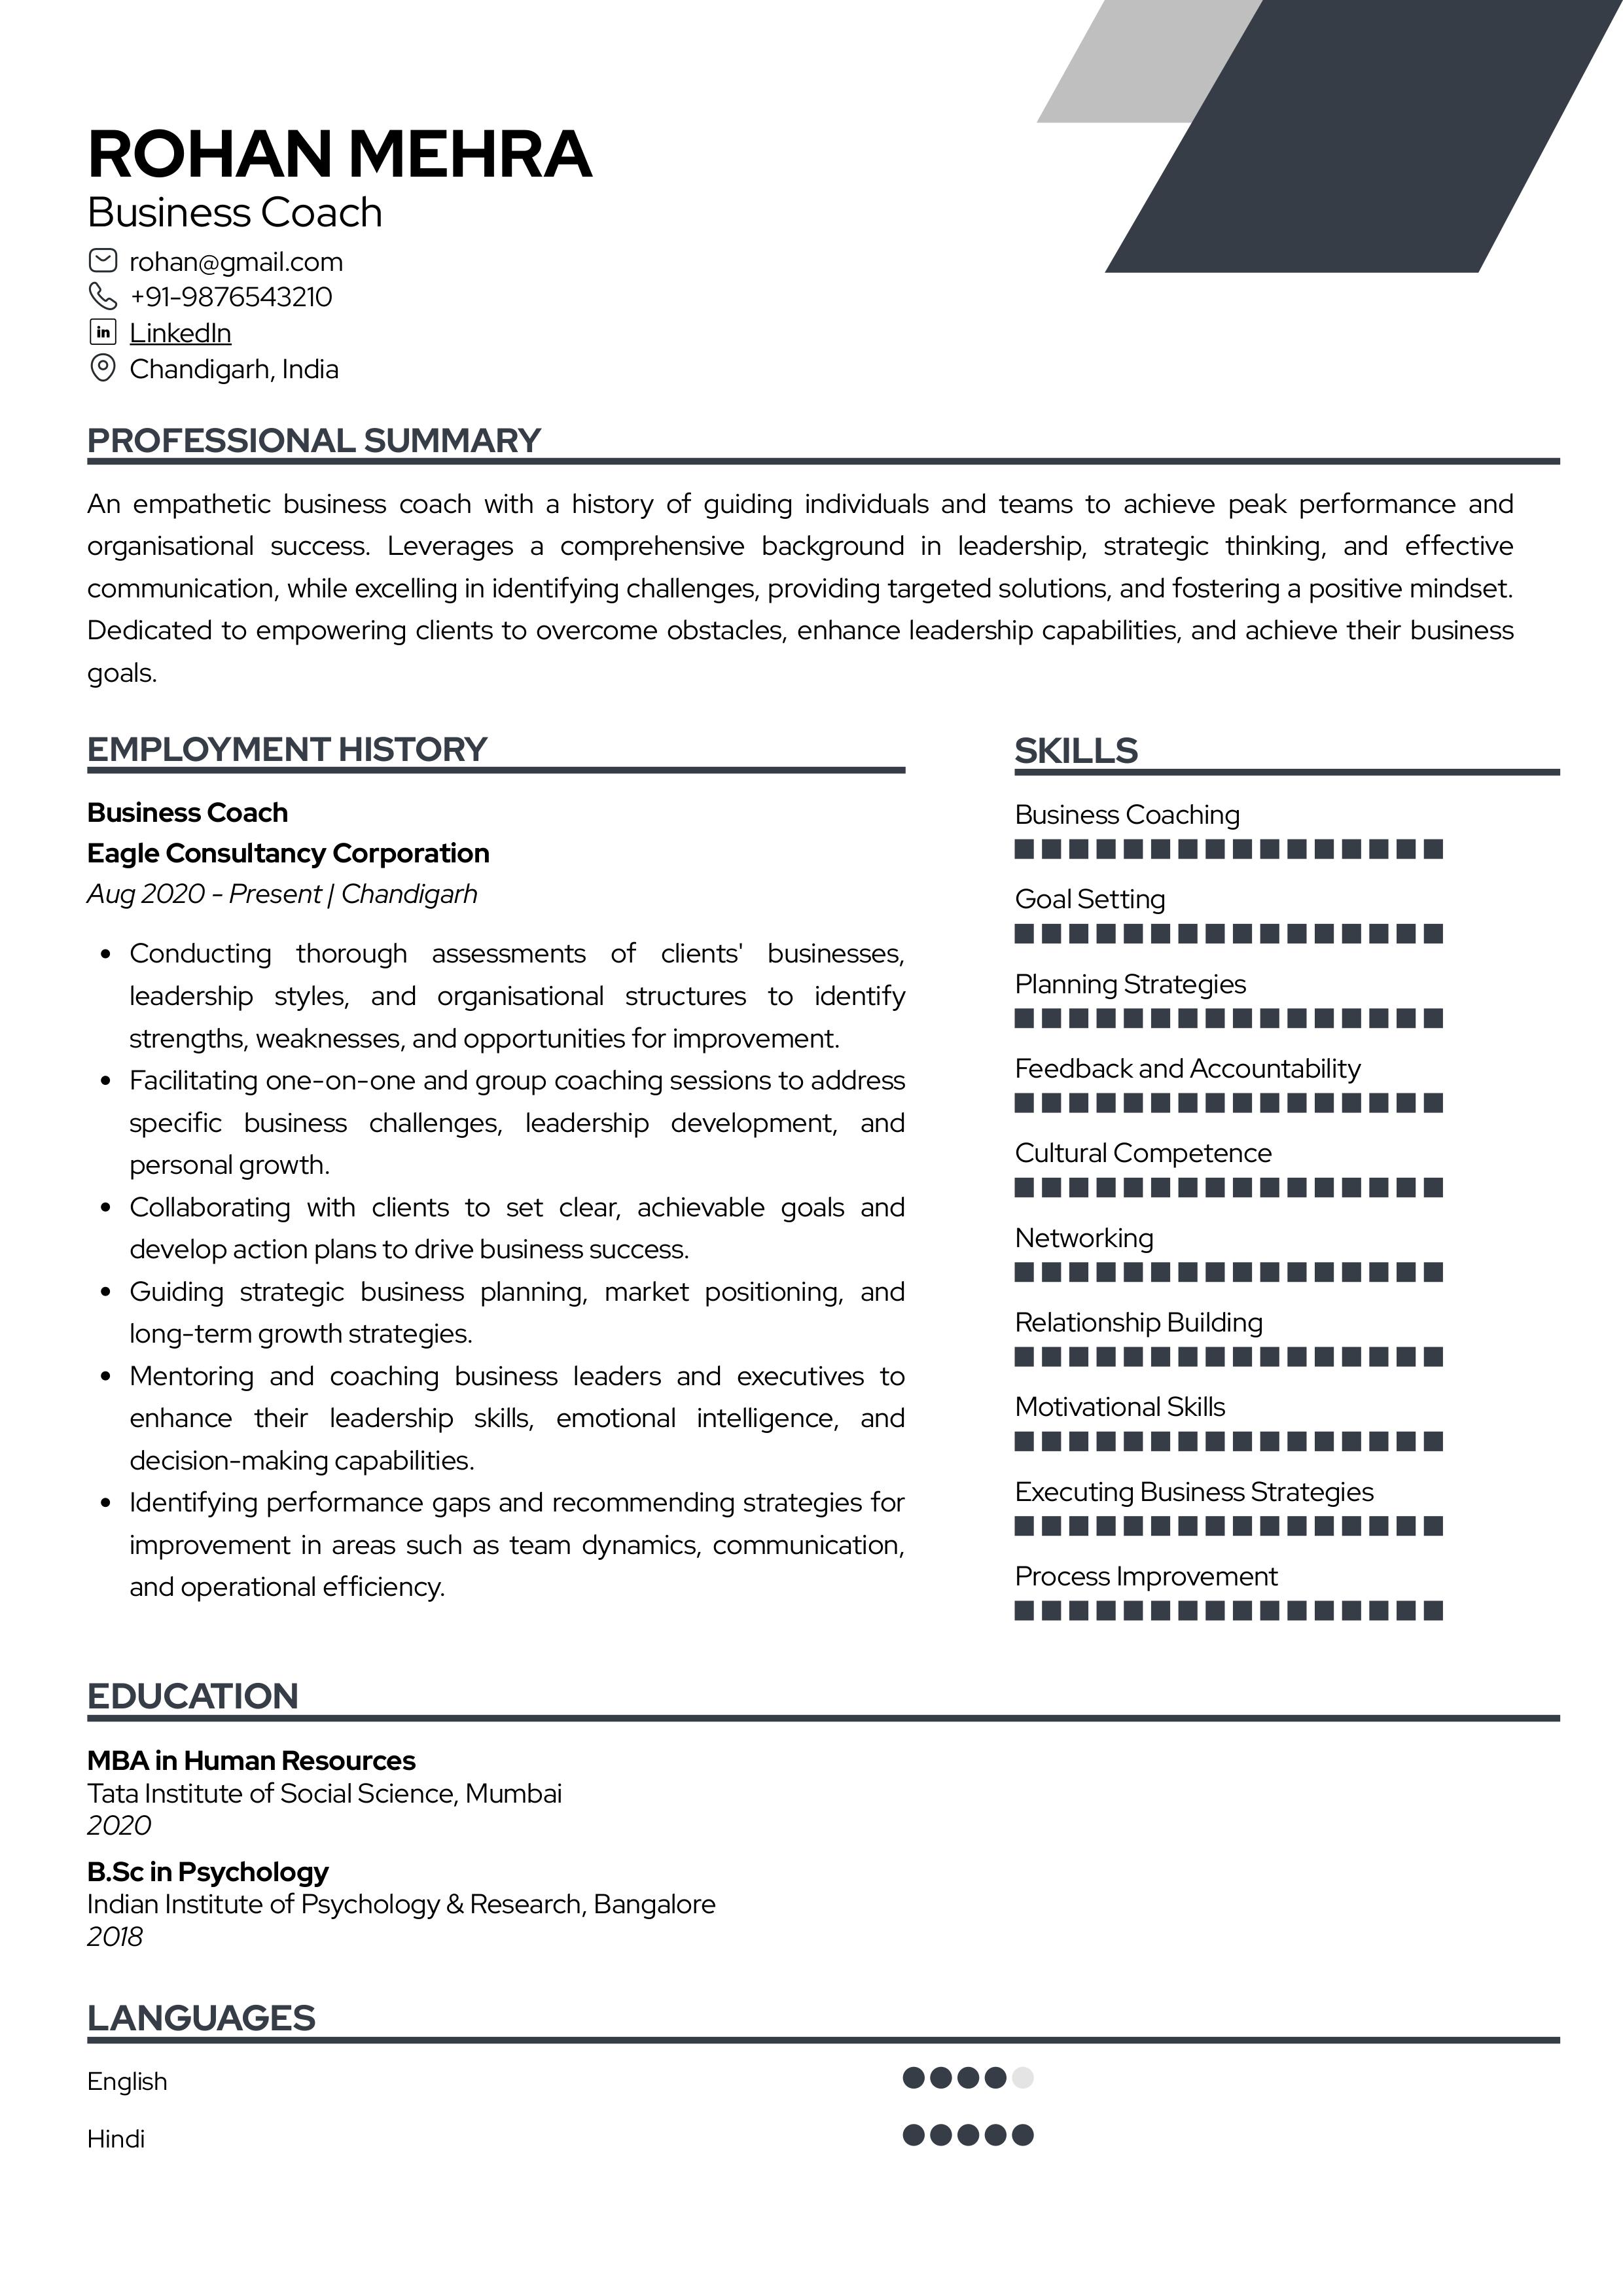 Sample Resume of Business Coach | Free Resume Templates & Samples on Resumod.co